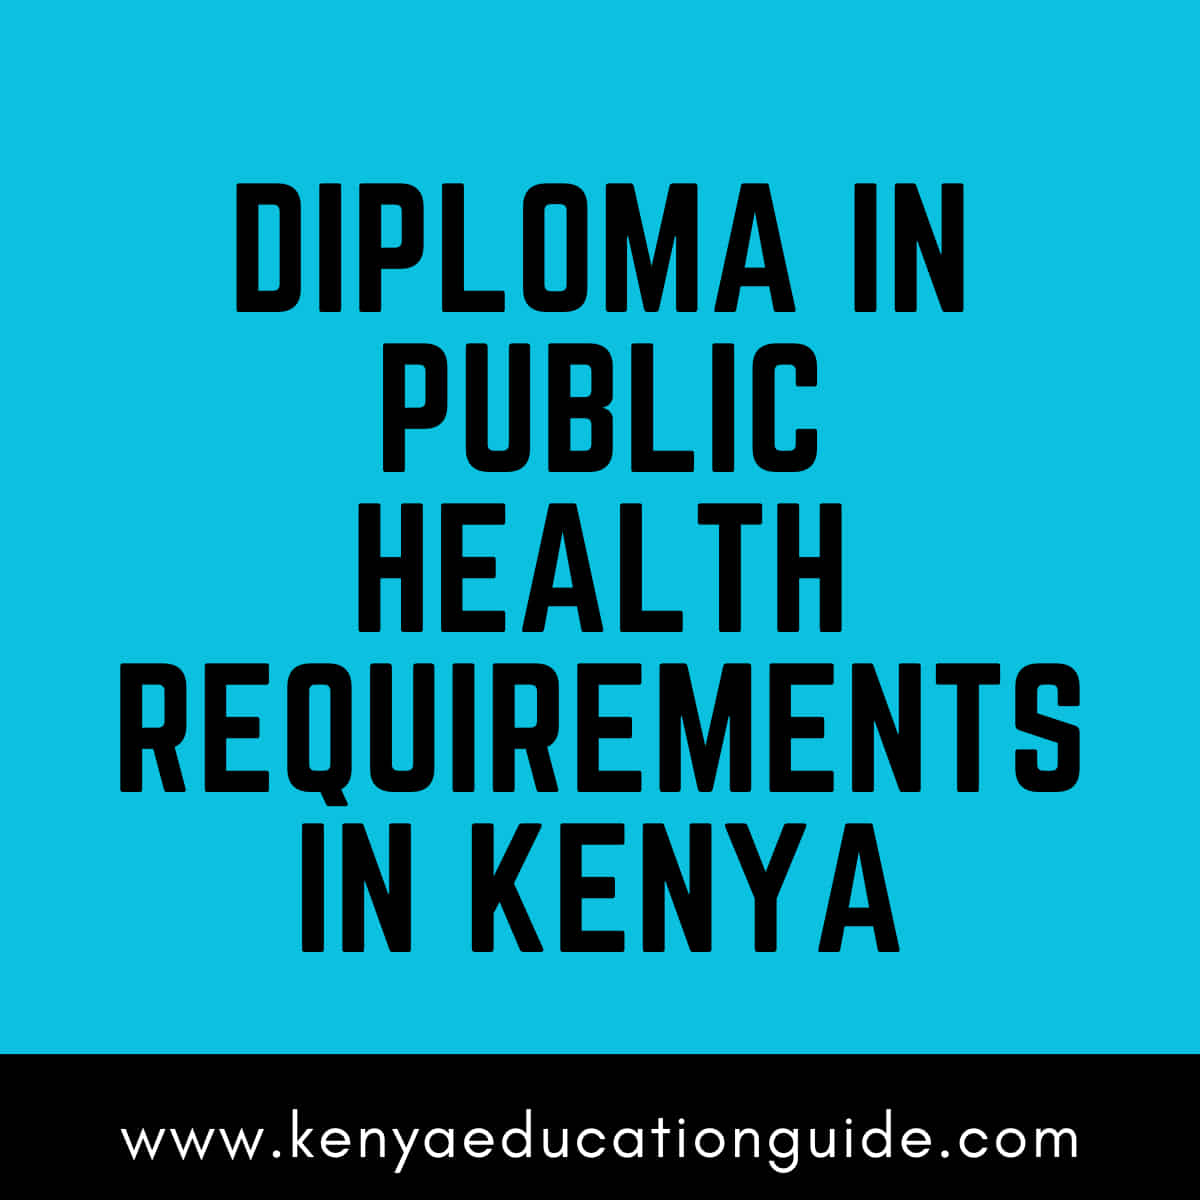 Diploma in public health requirements in Kenya